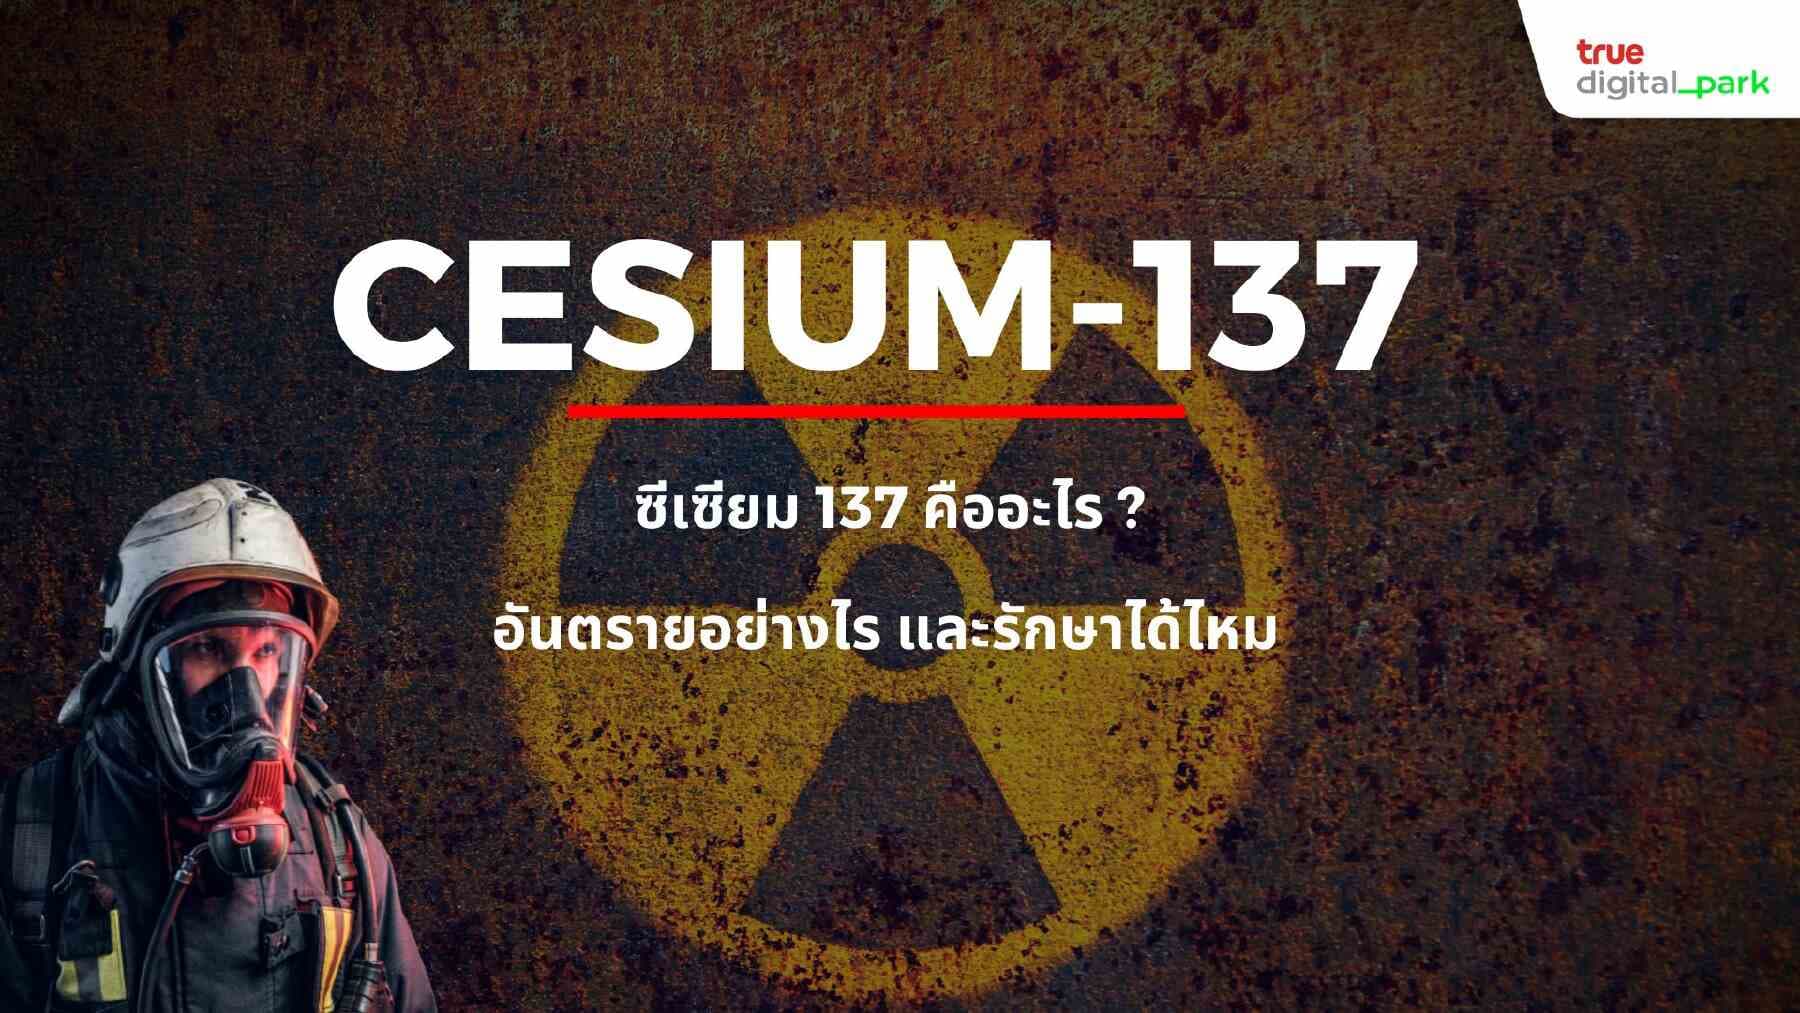 Cesium-137’s danger and what happens if I am exposed to it